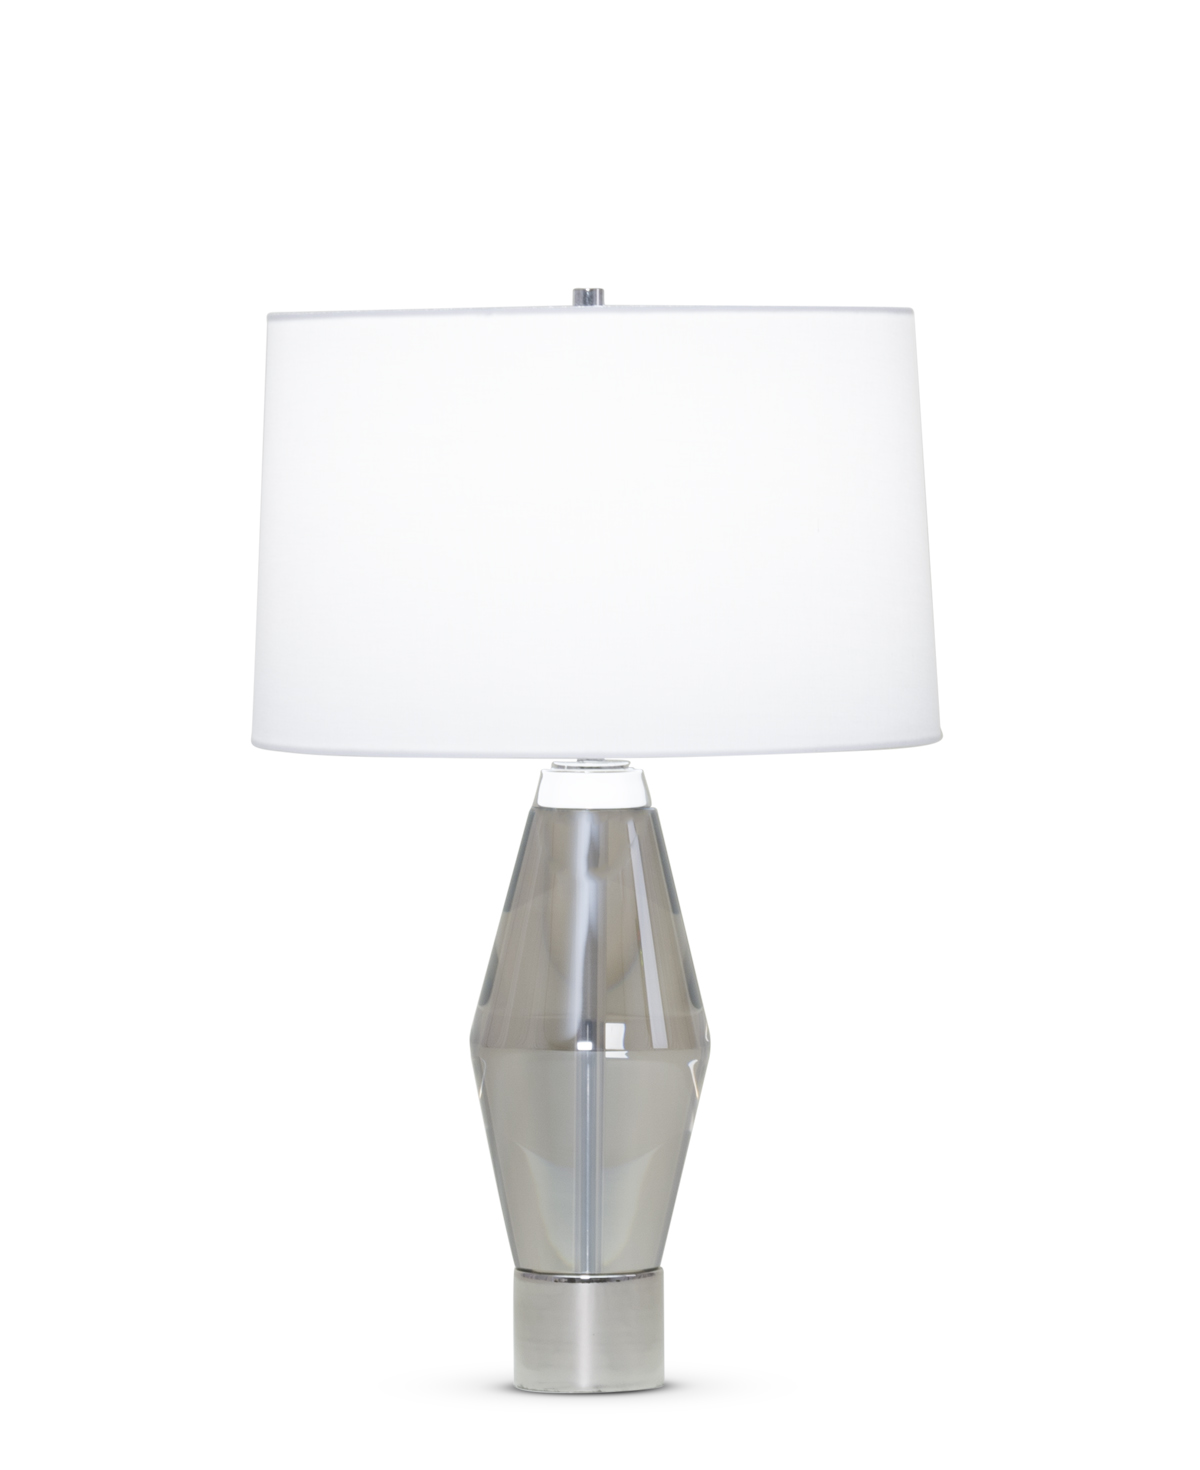 FlowDecor Jacob Table Lamp in crystal with smoked and metal with polished nickel finish and white linen tapered drum shade (# 3910)